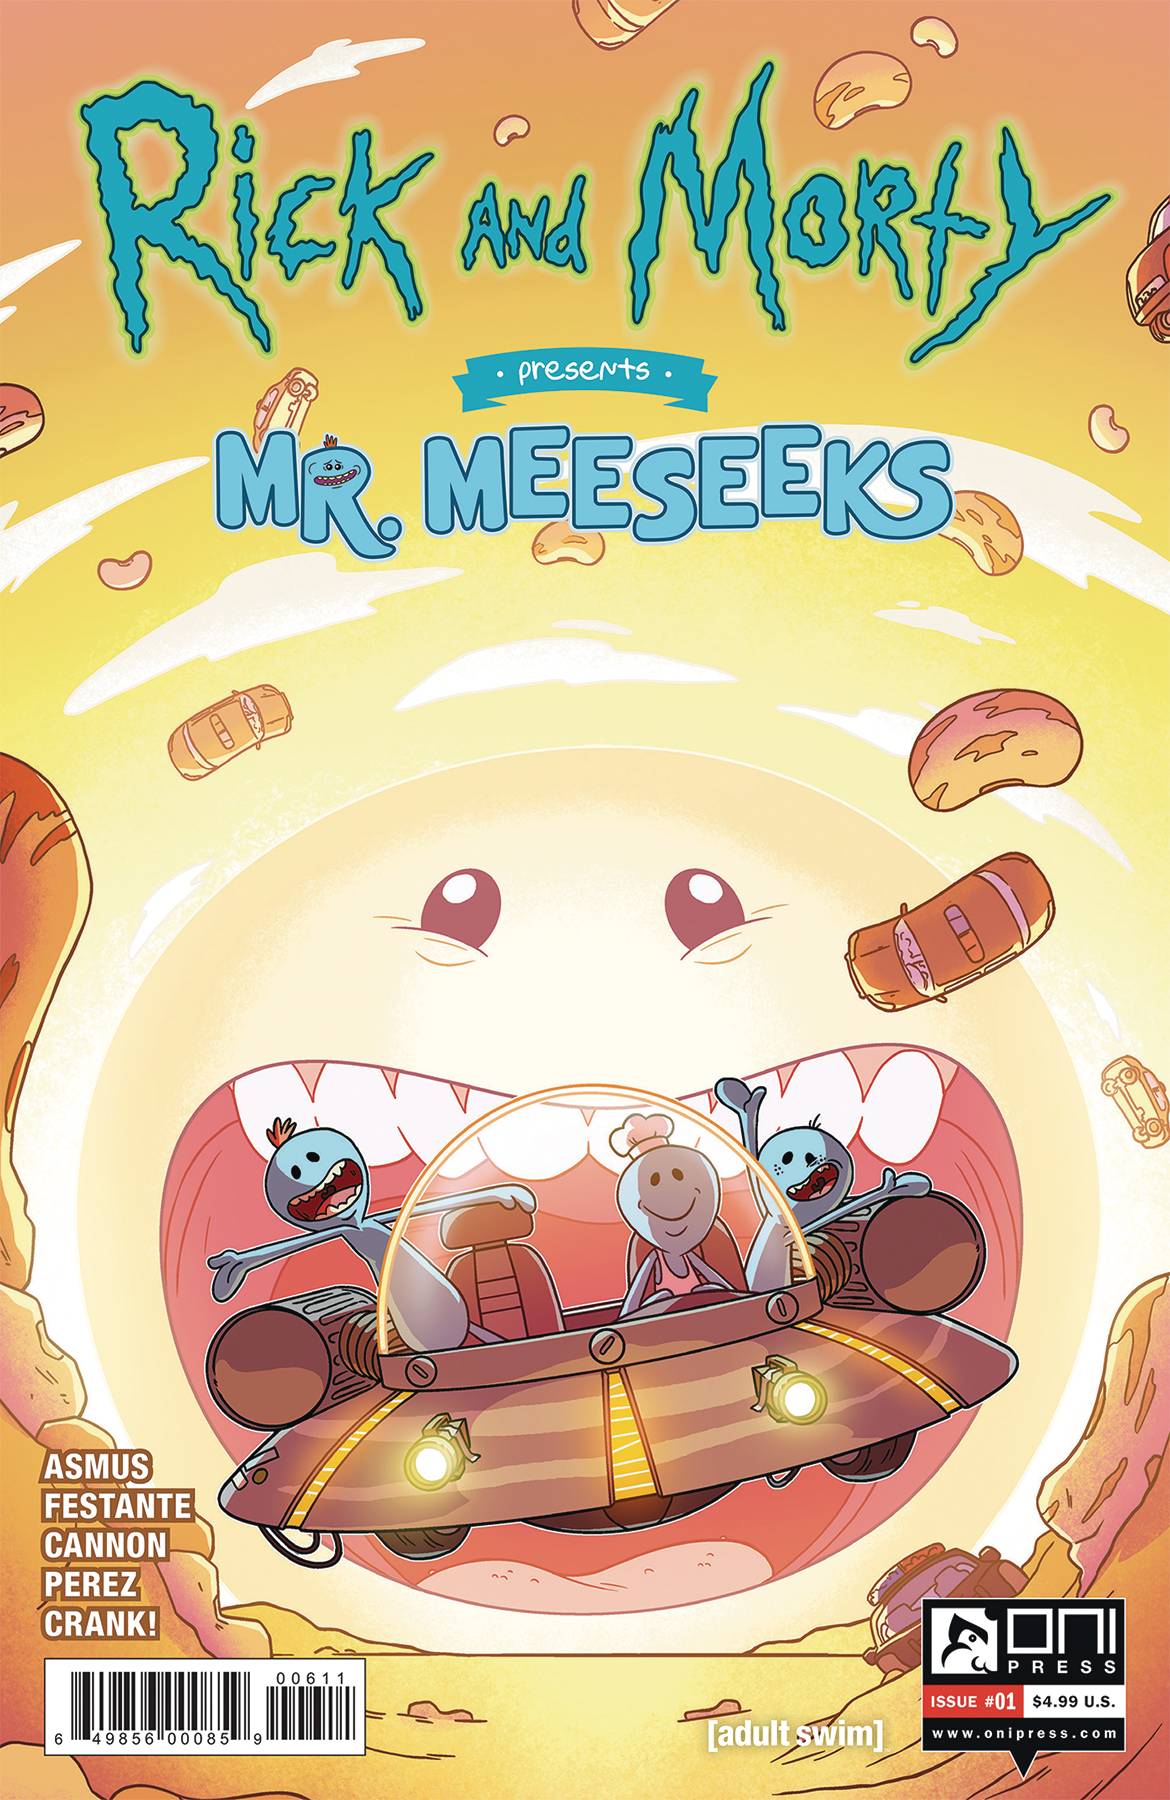 Rick and Morty Presents Mr Meeseeks #1 Cover A